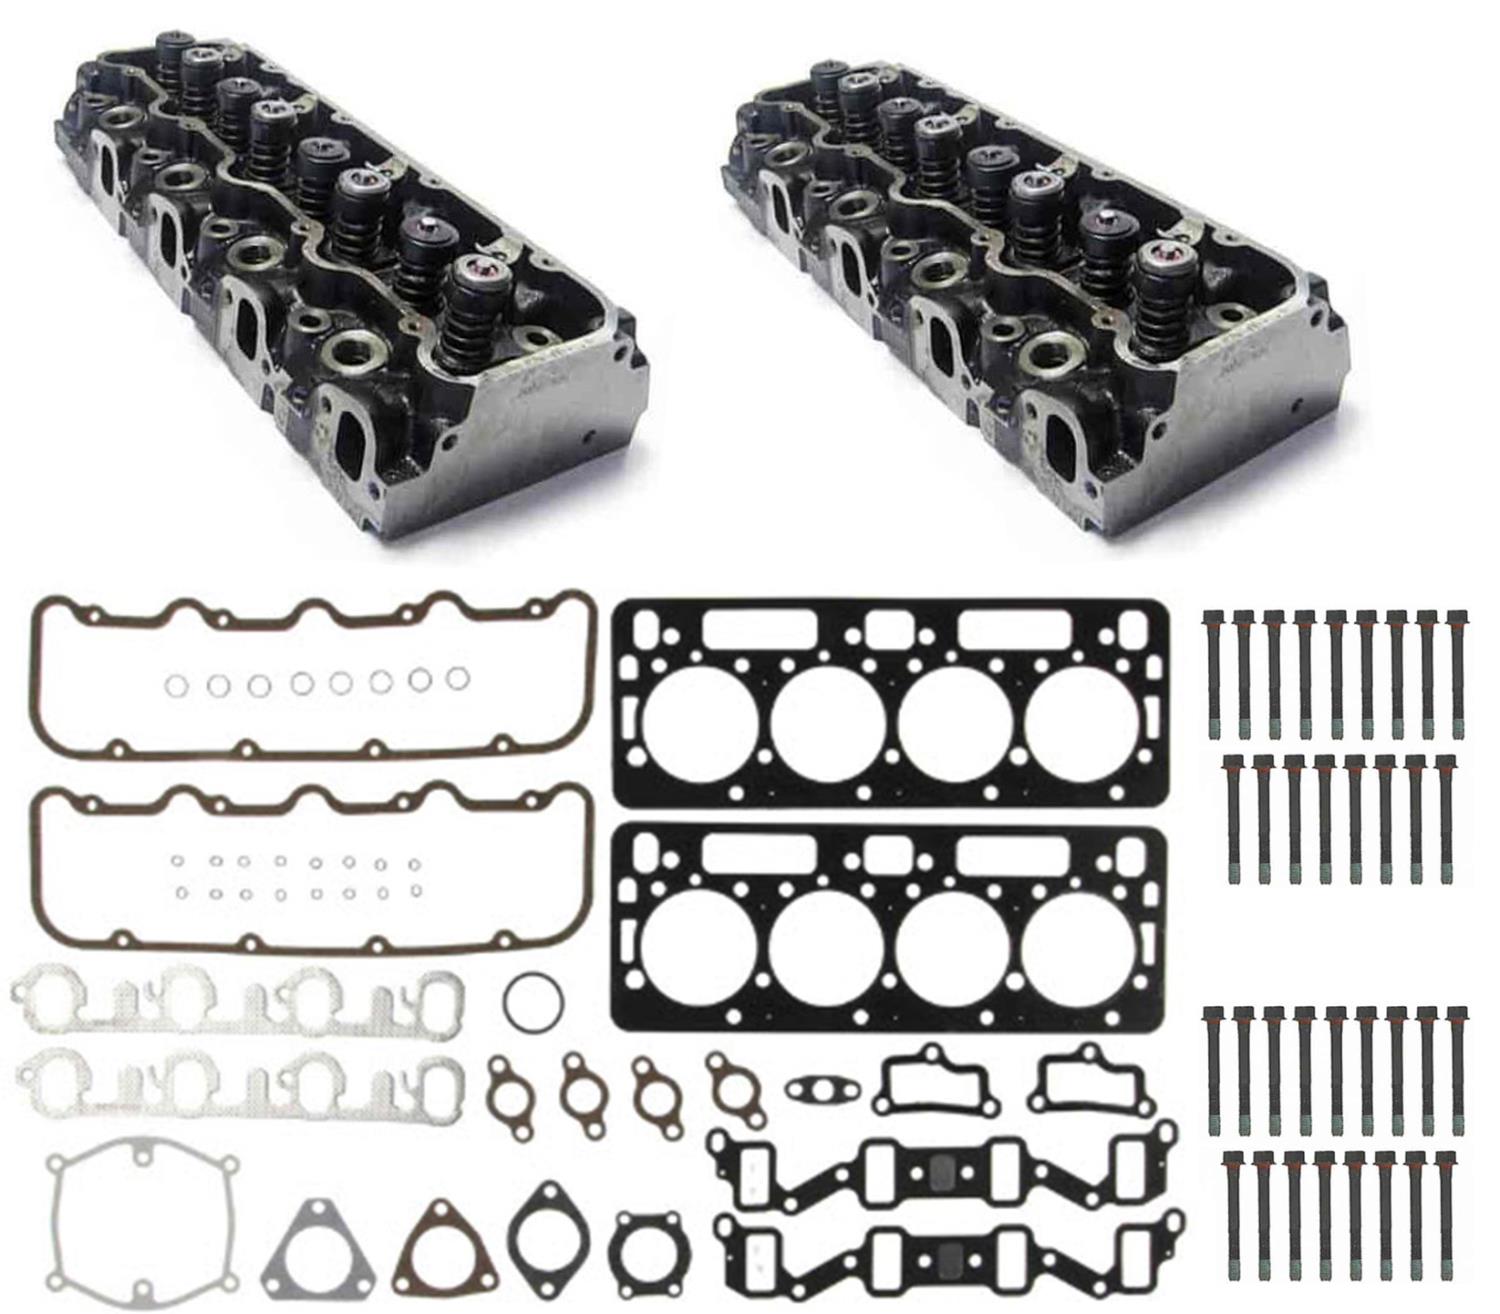 CHE855N Fully-Assembled Cylinder Head Kit for 1992-2002 GM 6.5L Diesel Engines w/Straight Intake Bolt Holes